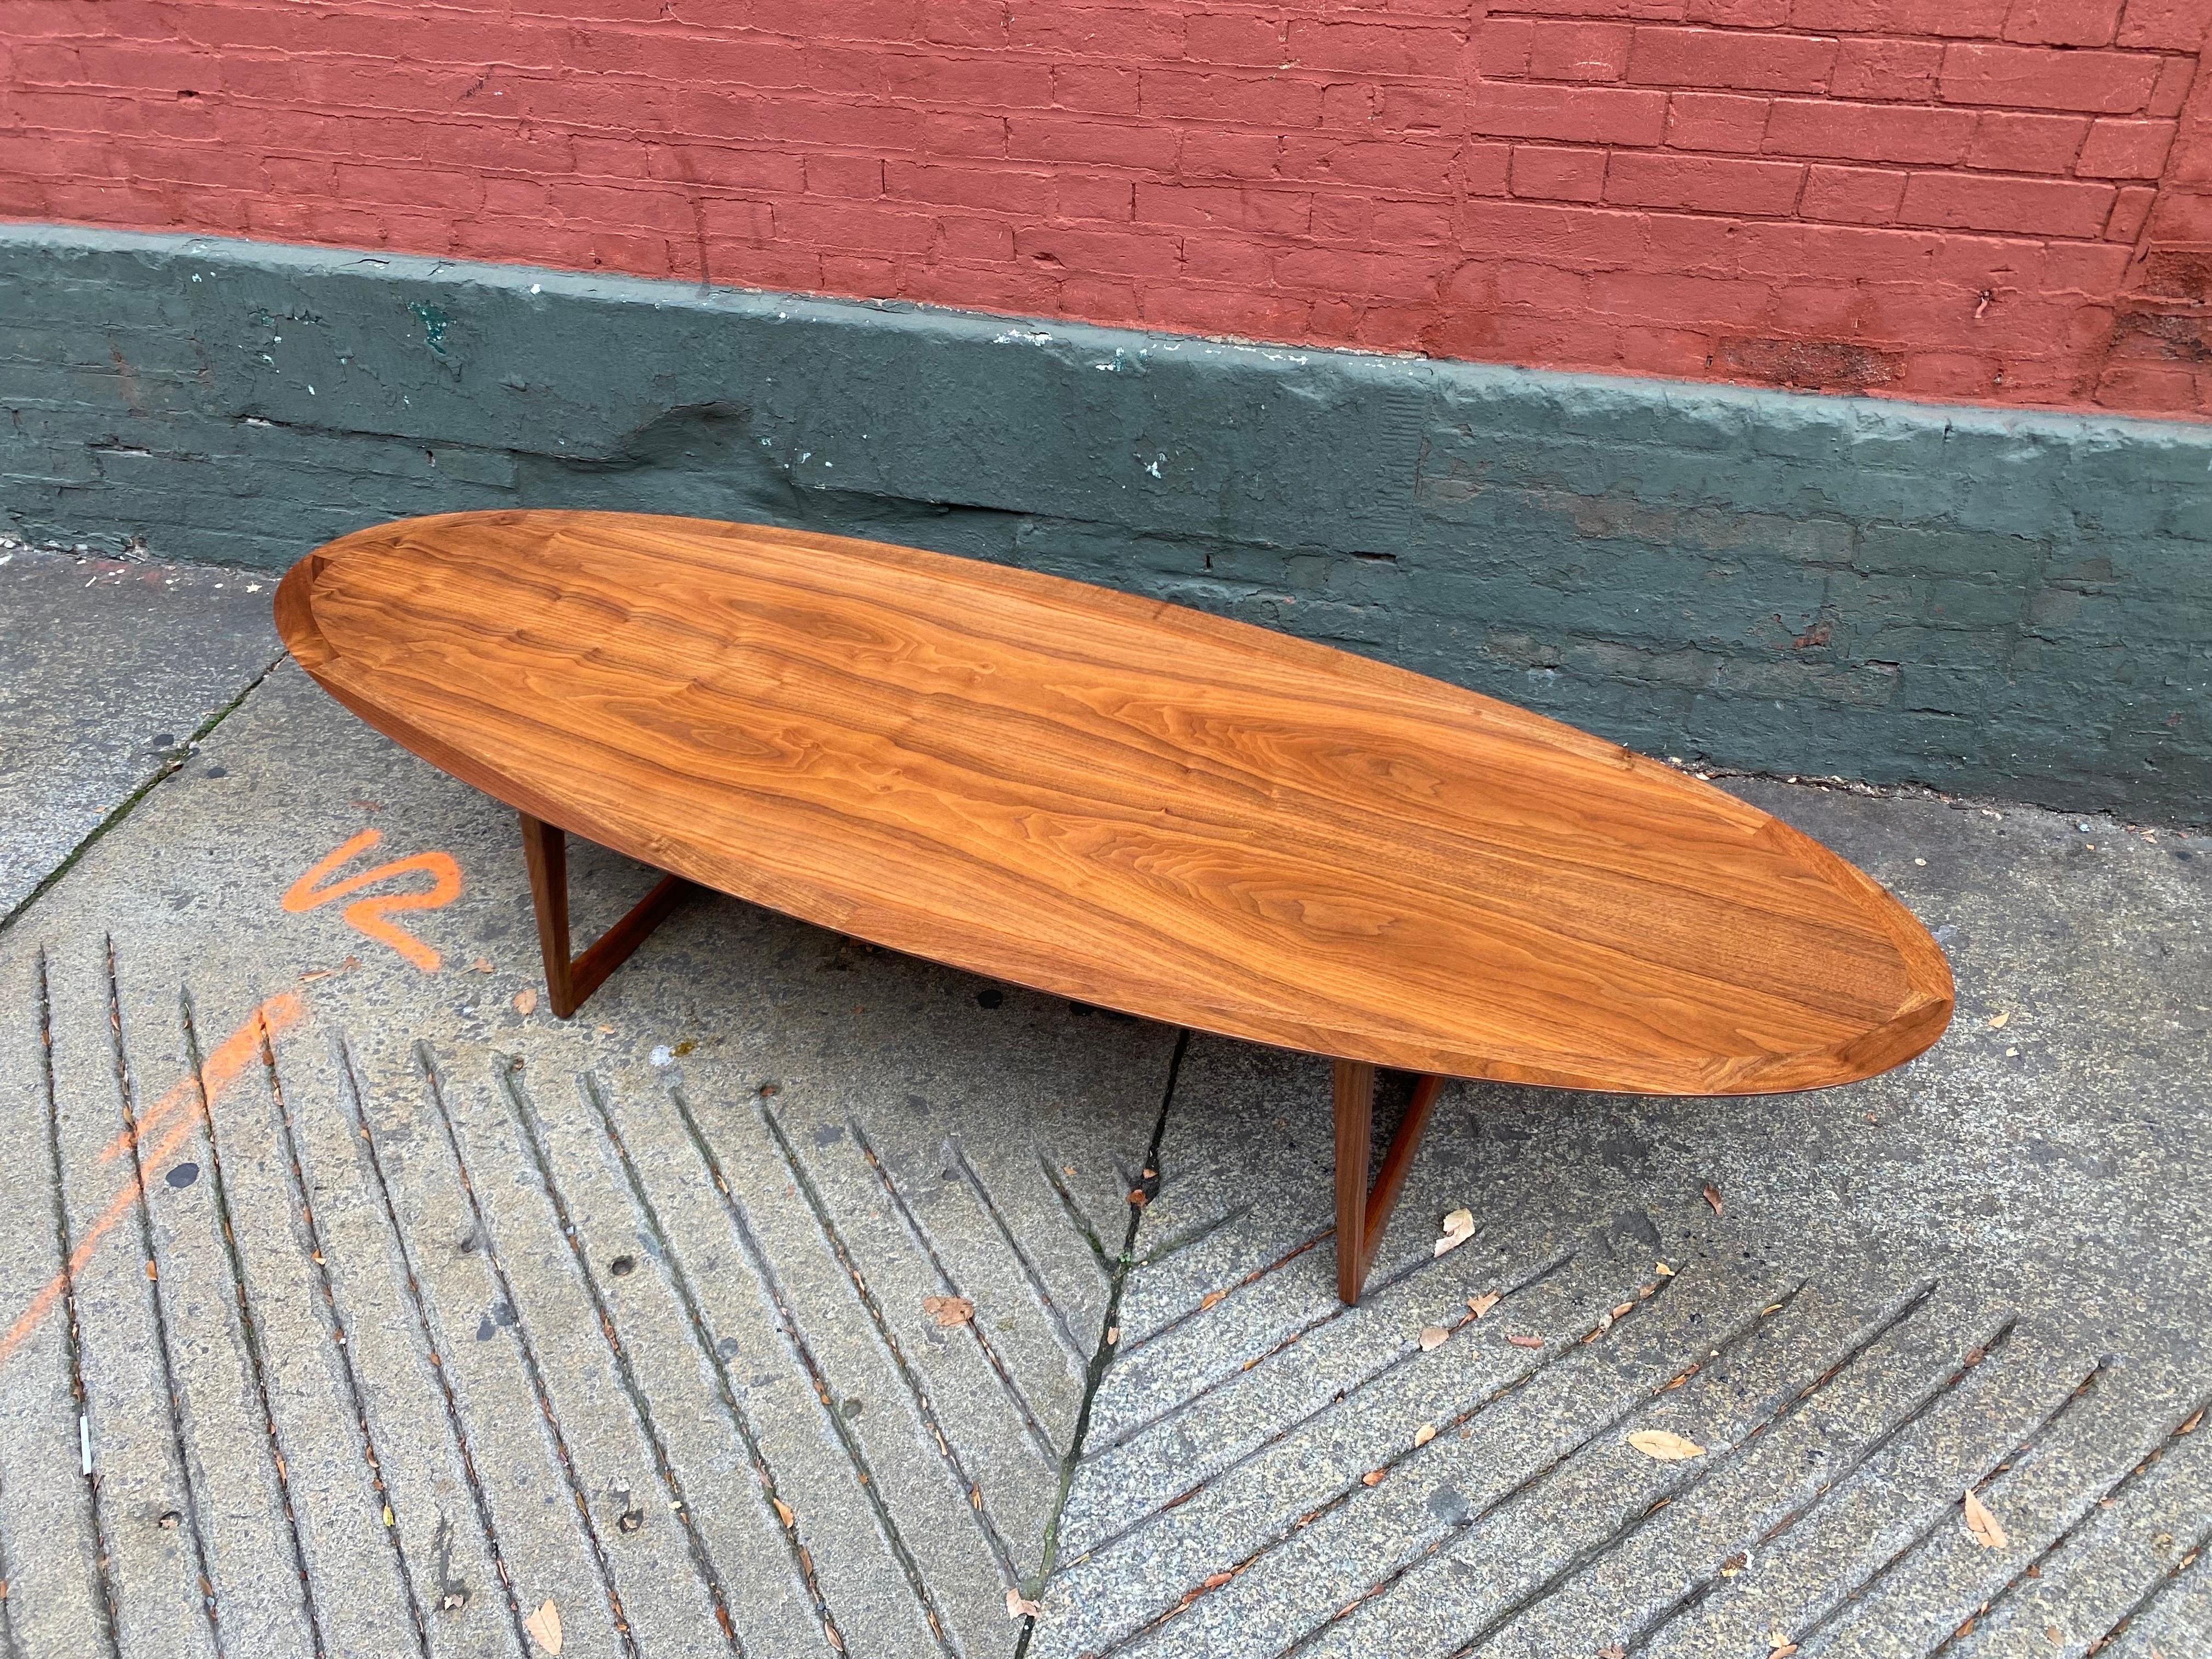 Moreddi Teak Surfboard Coffee Table with splayed legs.  Great scale and size!  Legs have a great angle that sets the table apart from the average!  Legs come off for easy moving and shipping.  Newly refinishe!